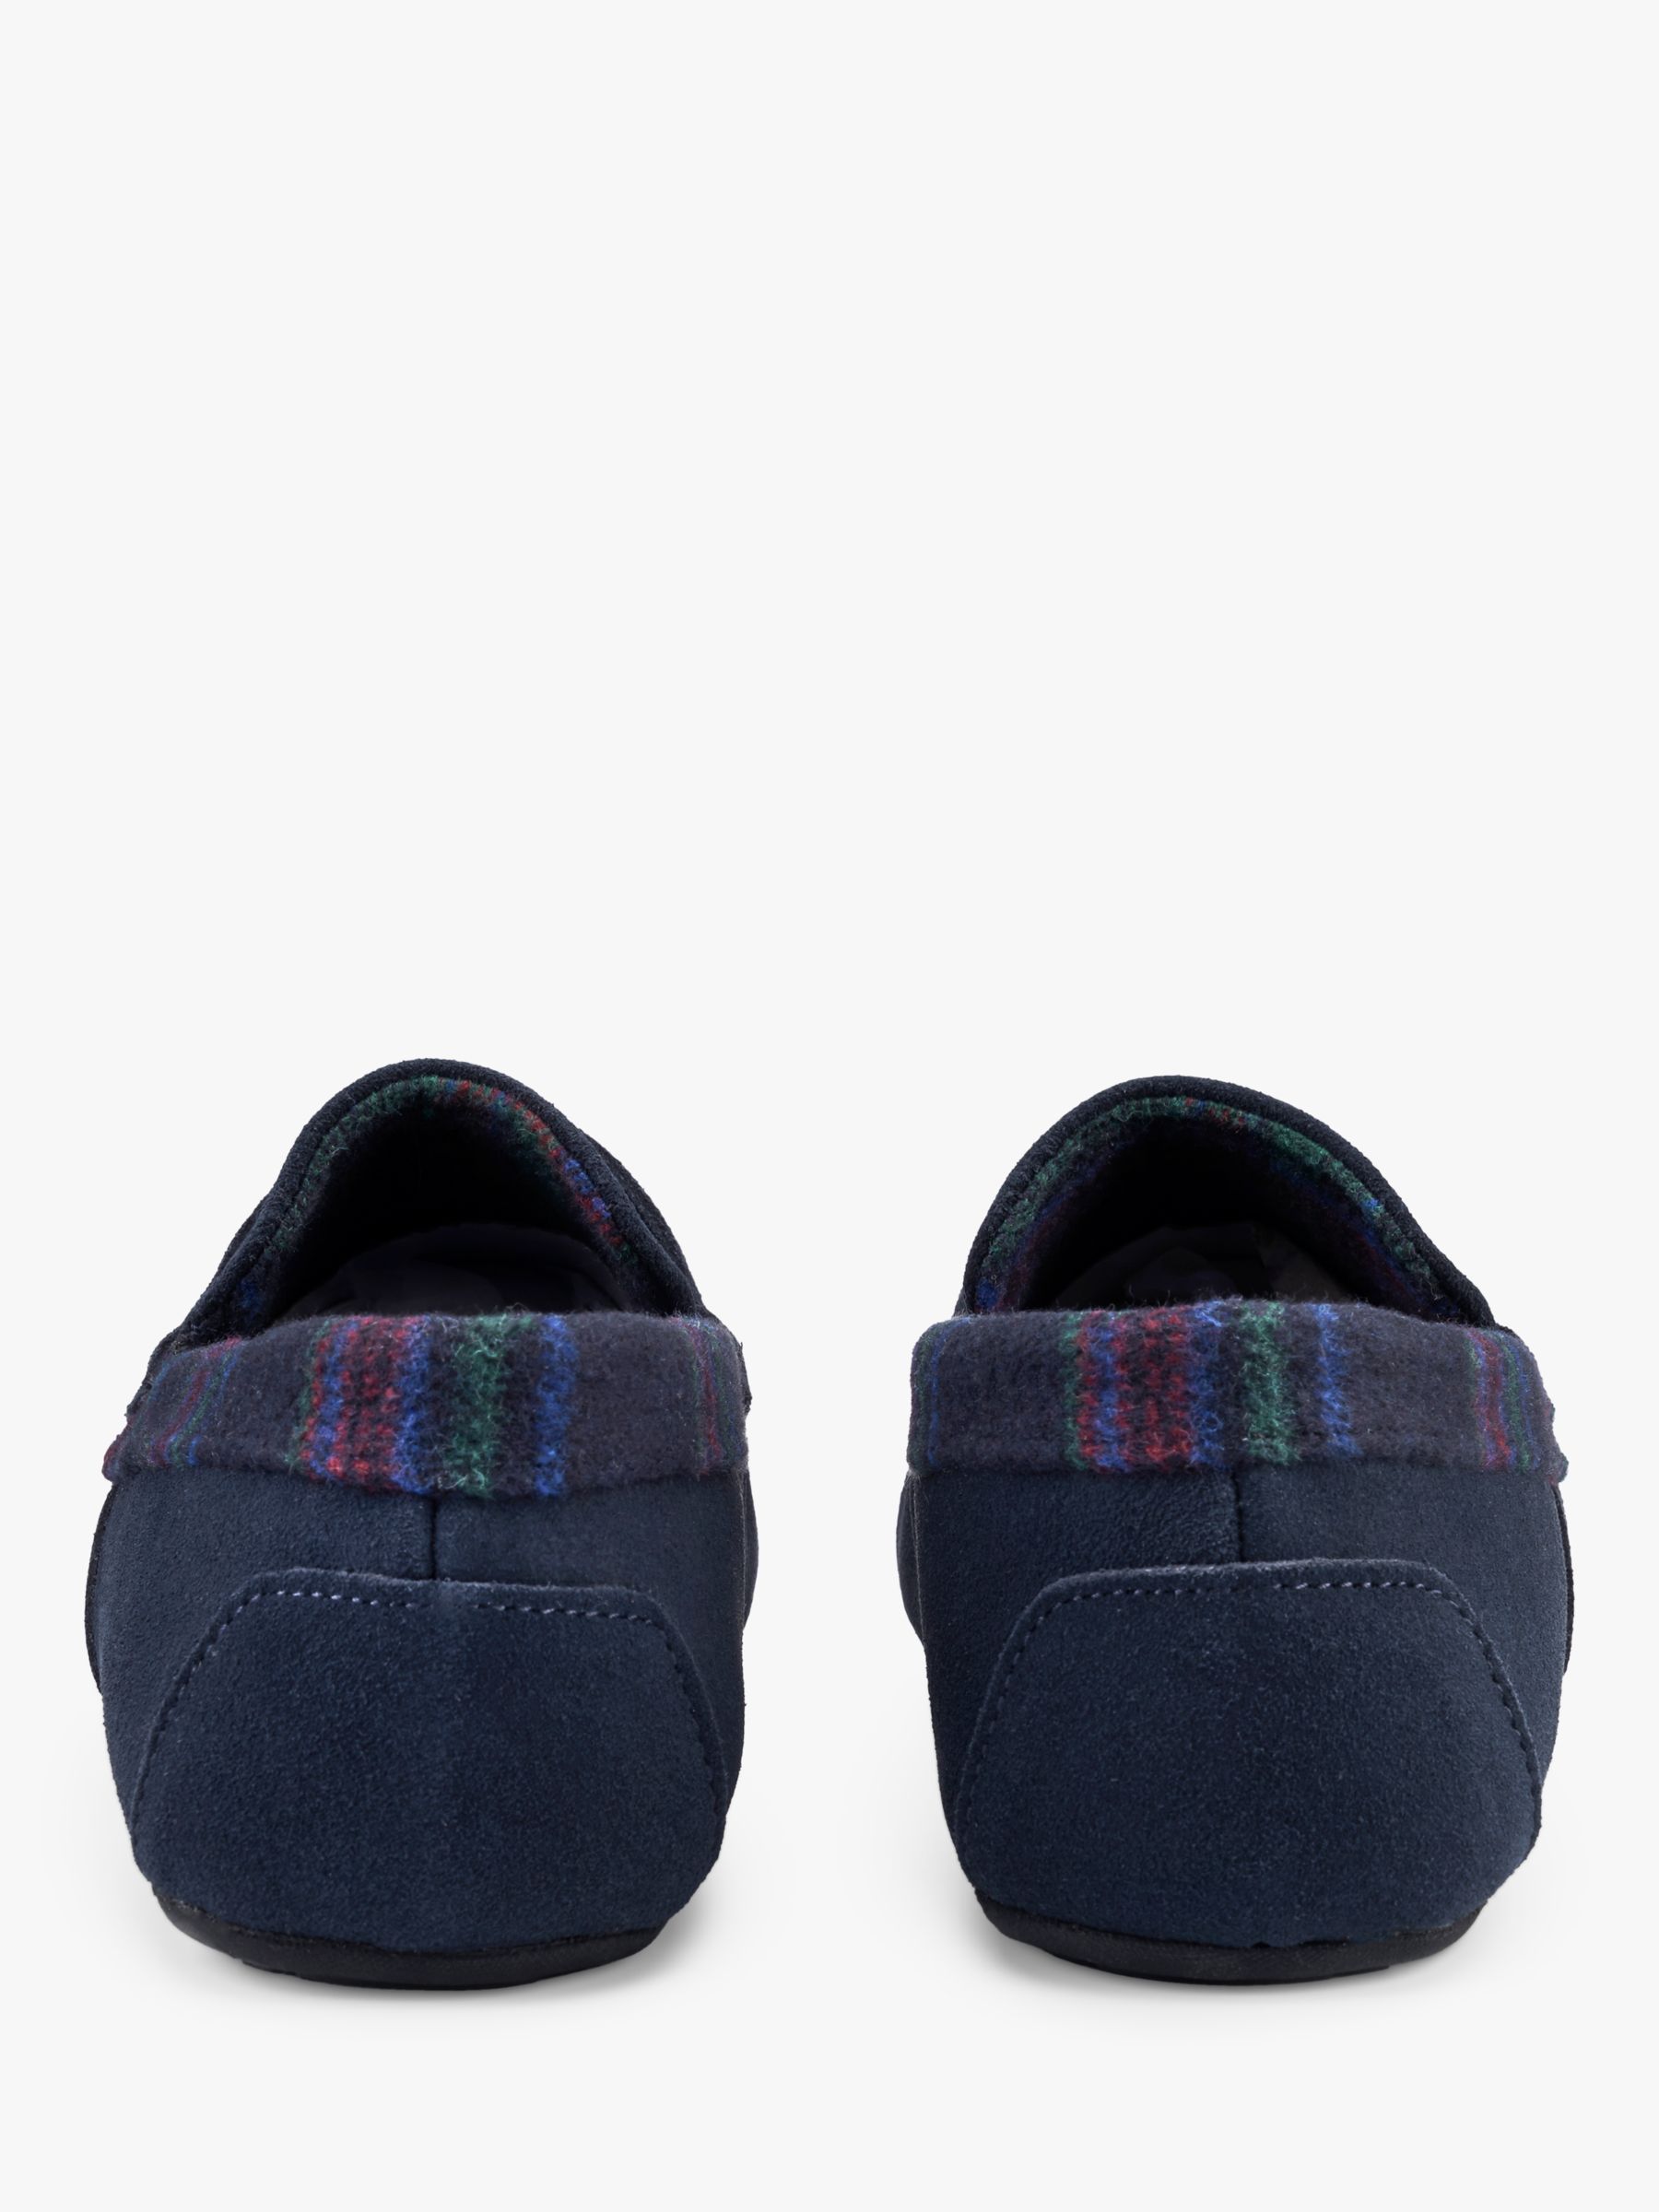 Hotter Repose Moccasin Slippers, Navy, 6